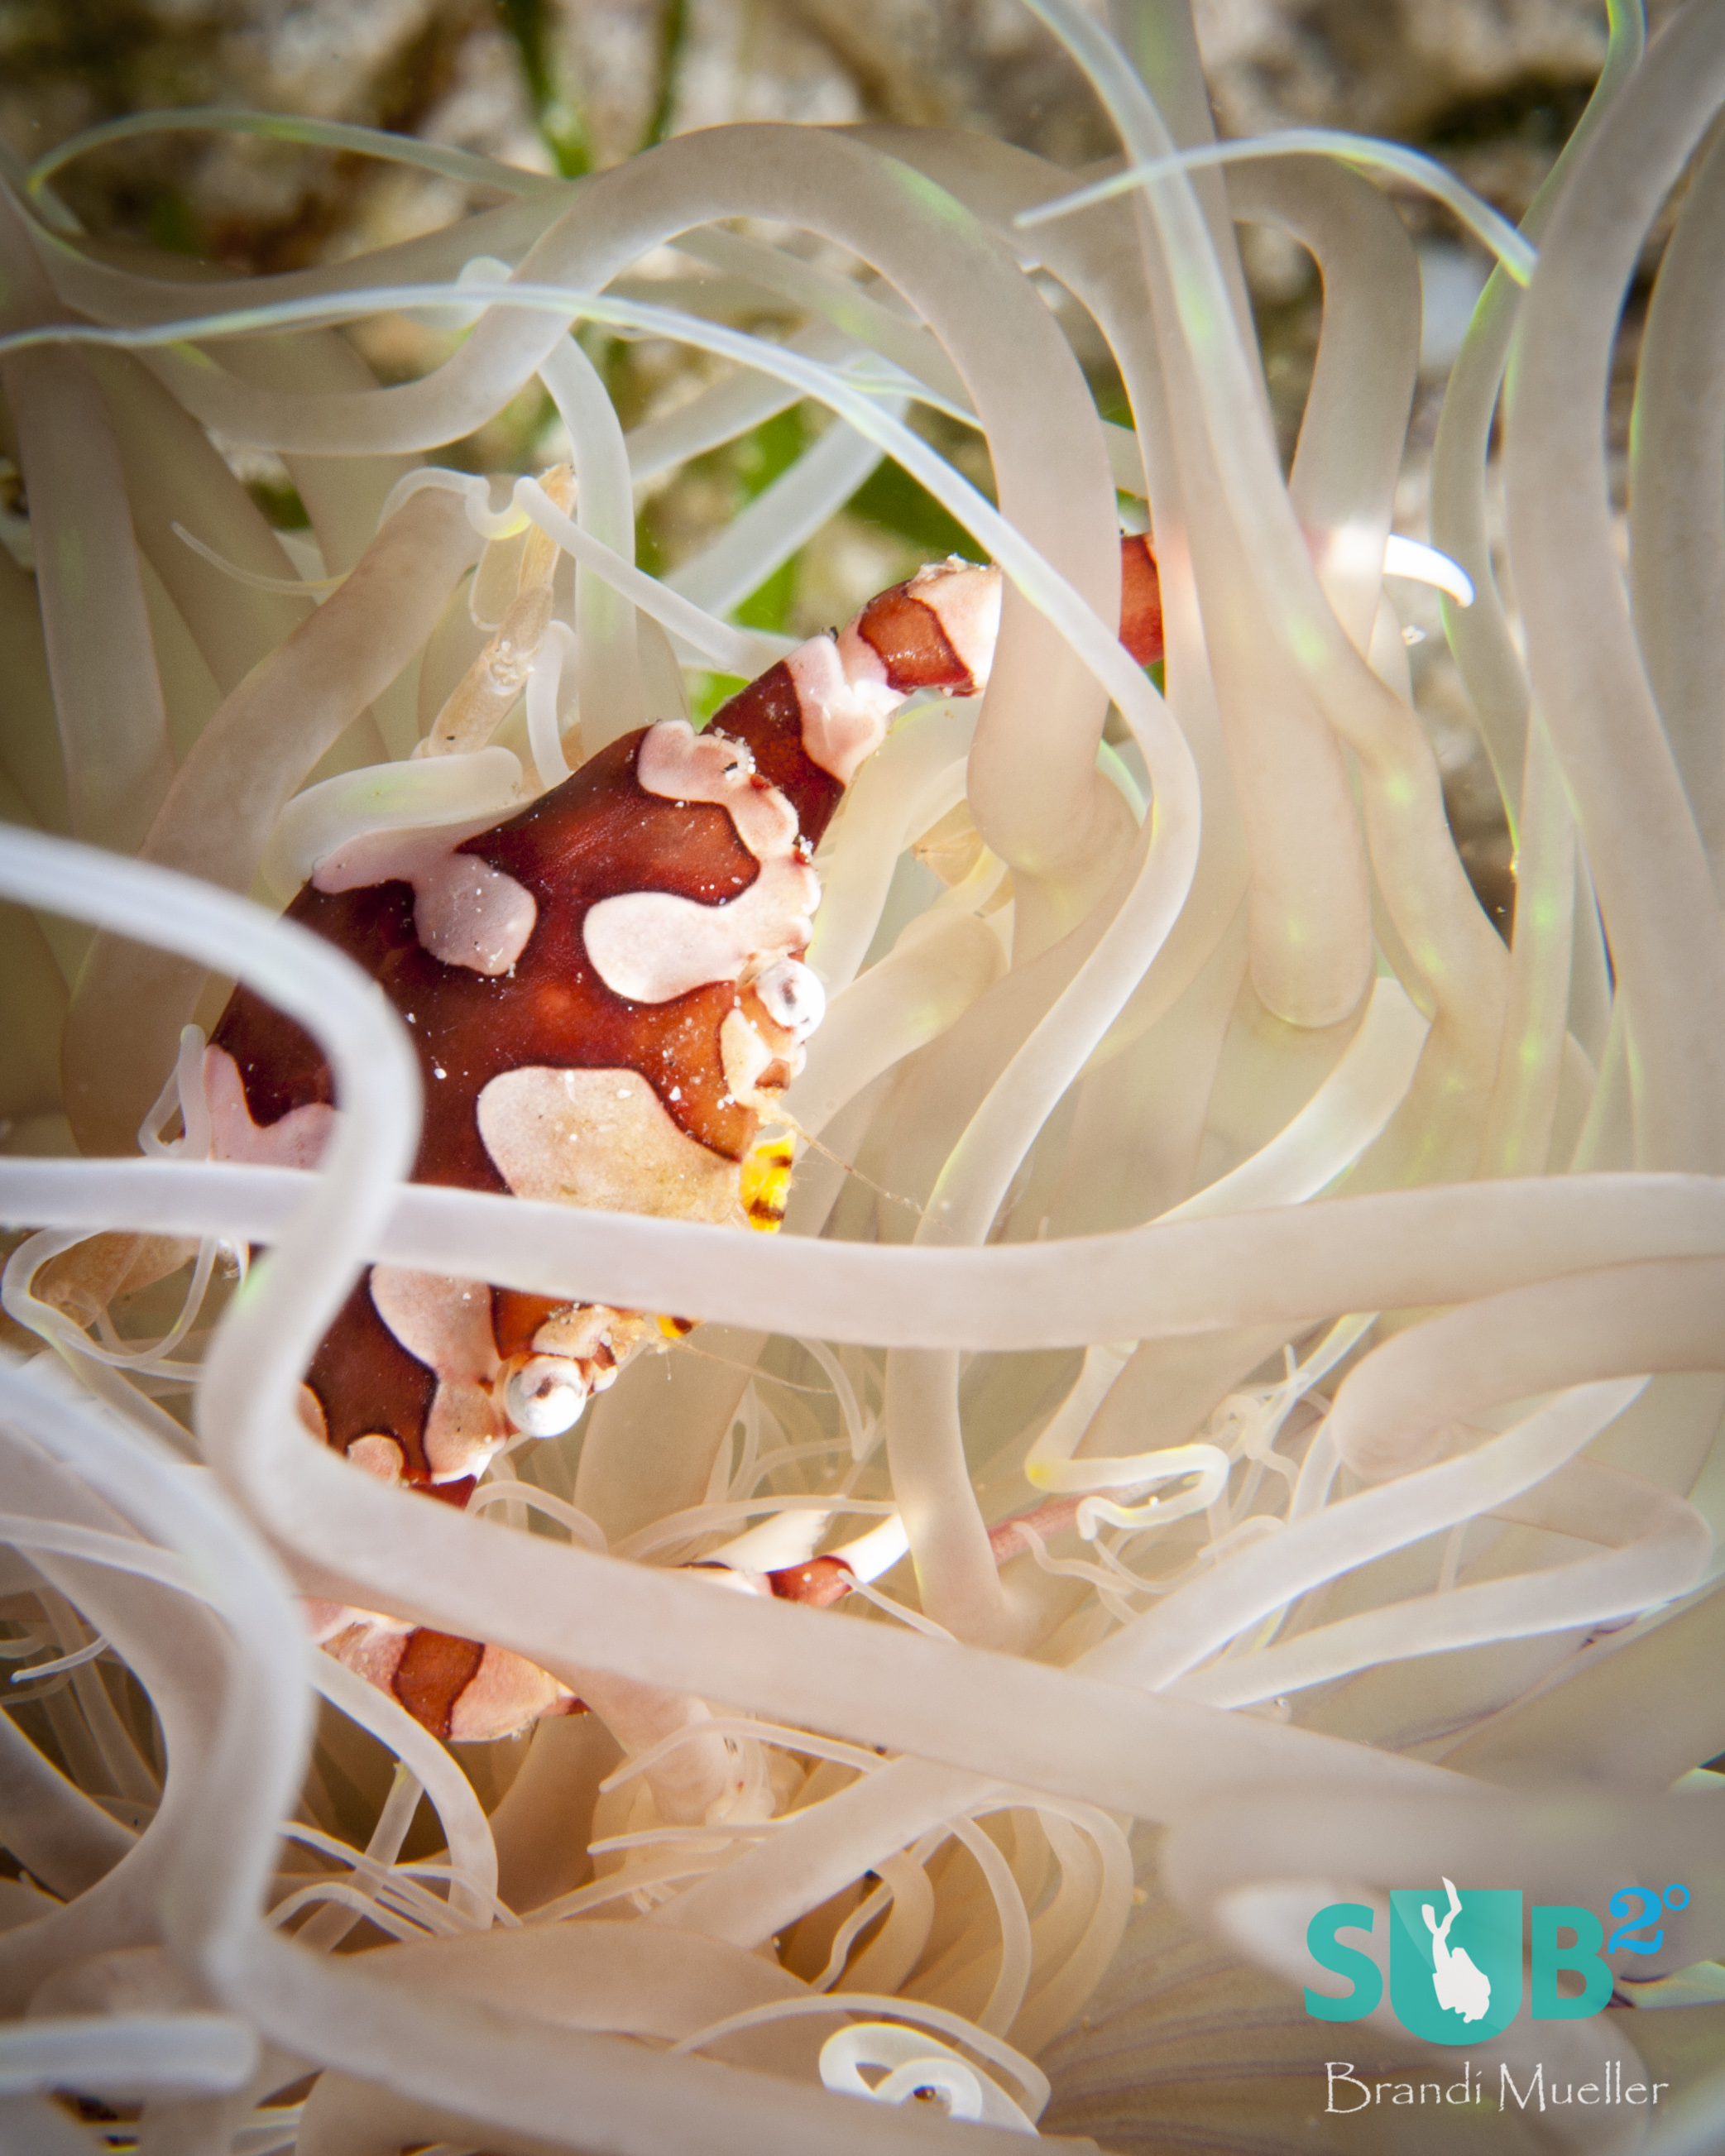 A harlequin crab (Issocarcinus laevis) hiding in a tube anemone.